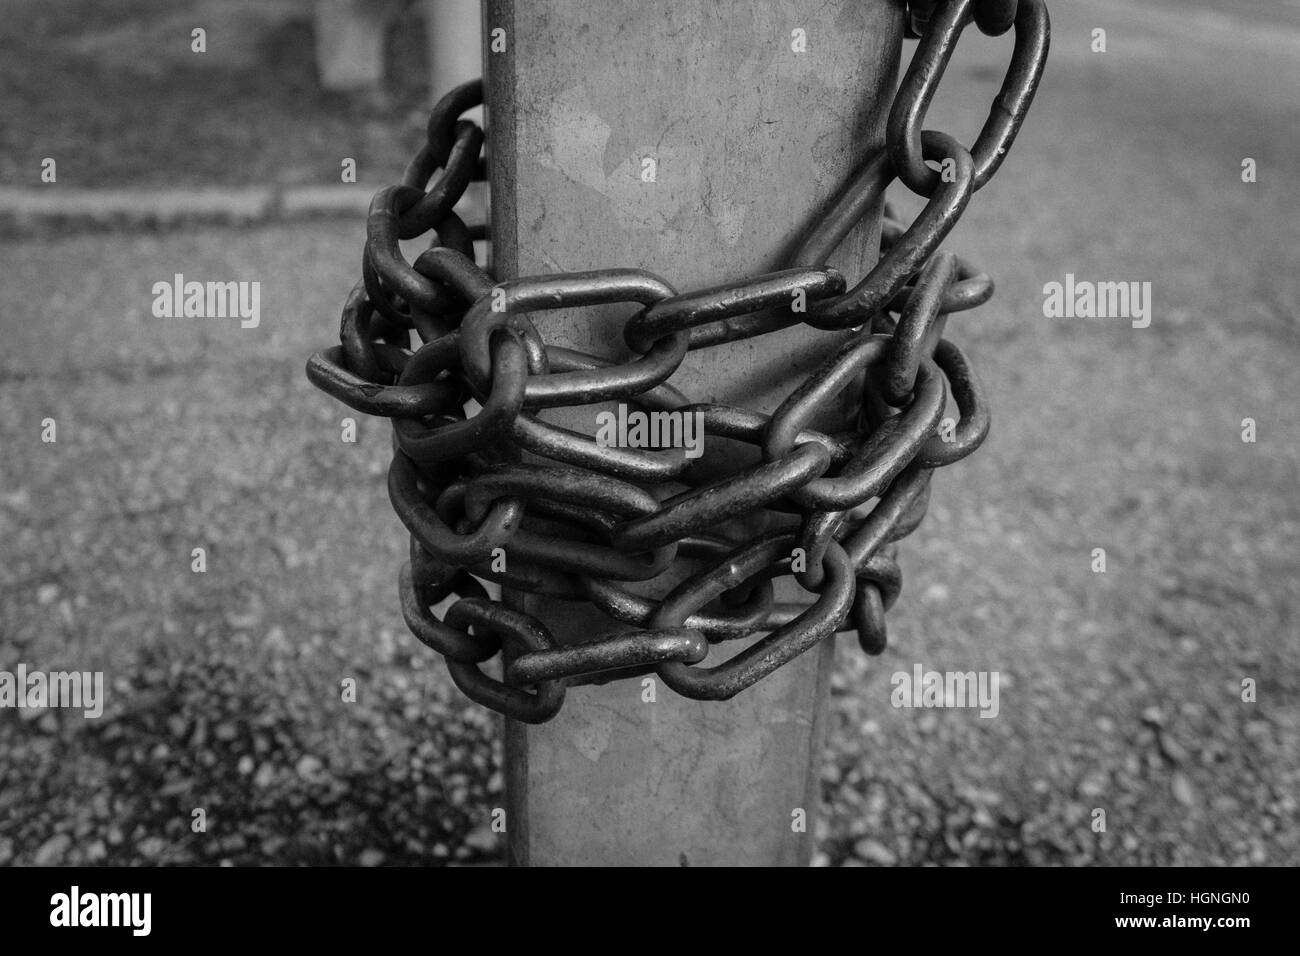 Close-up view of old rusty chain links. Stock Photo